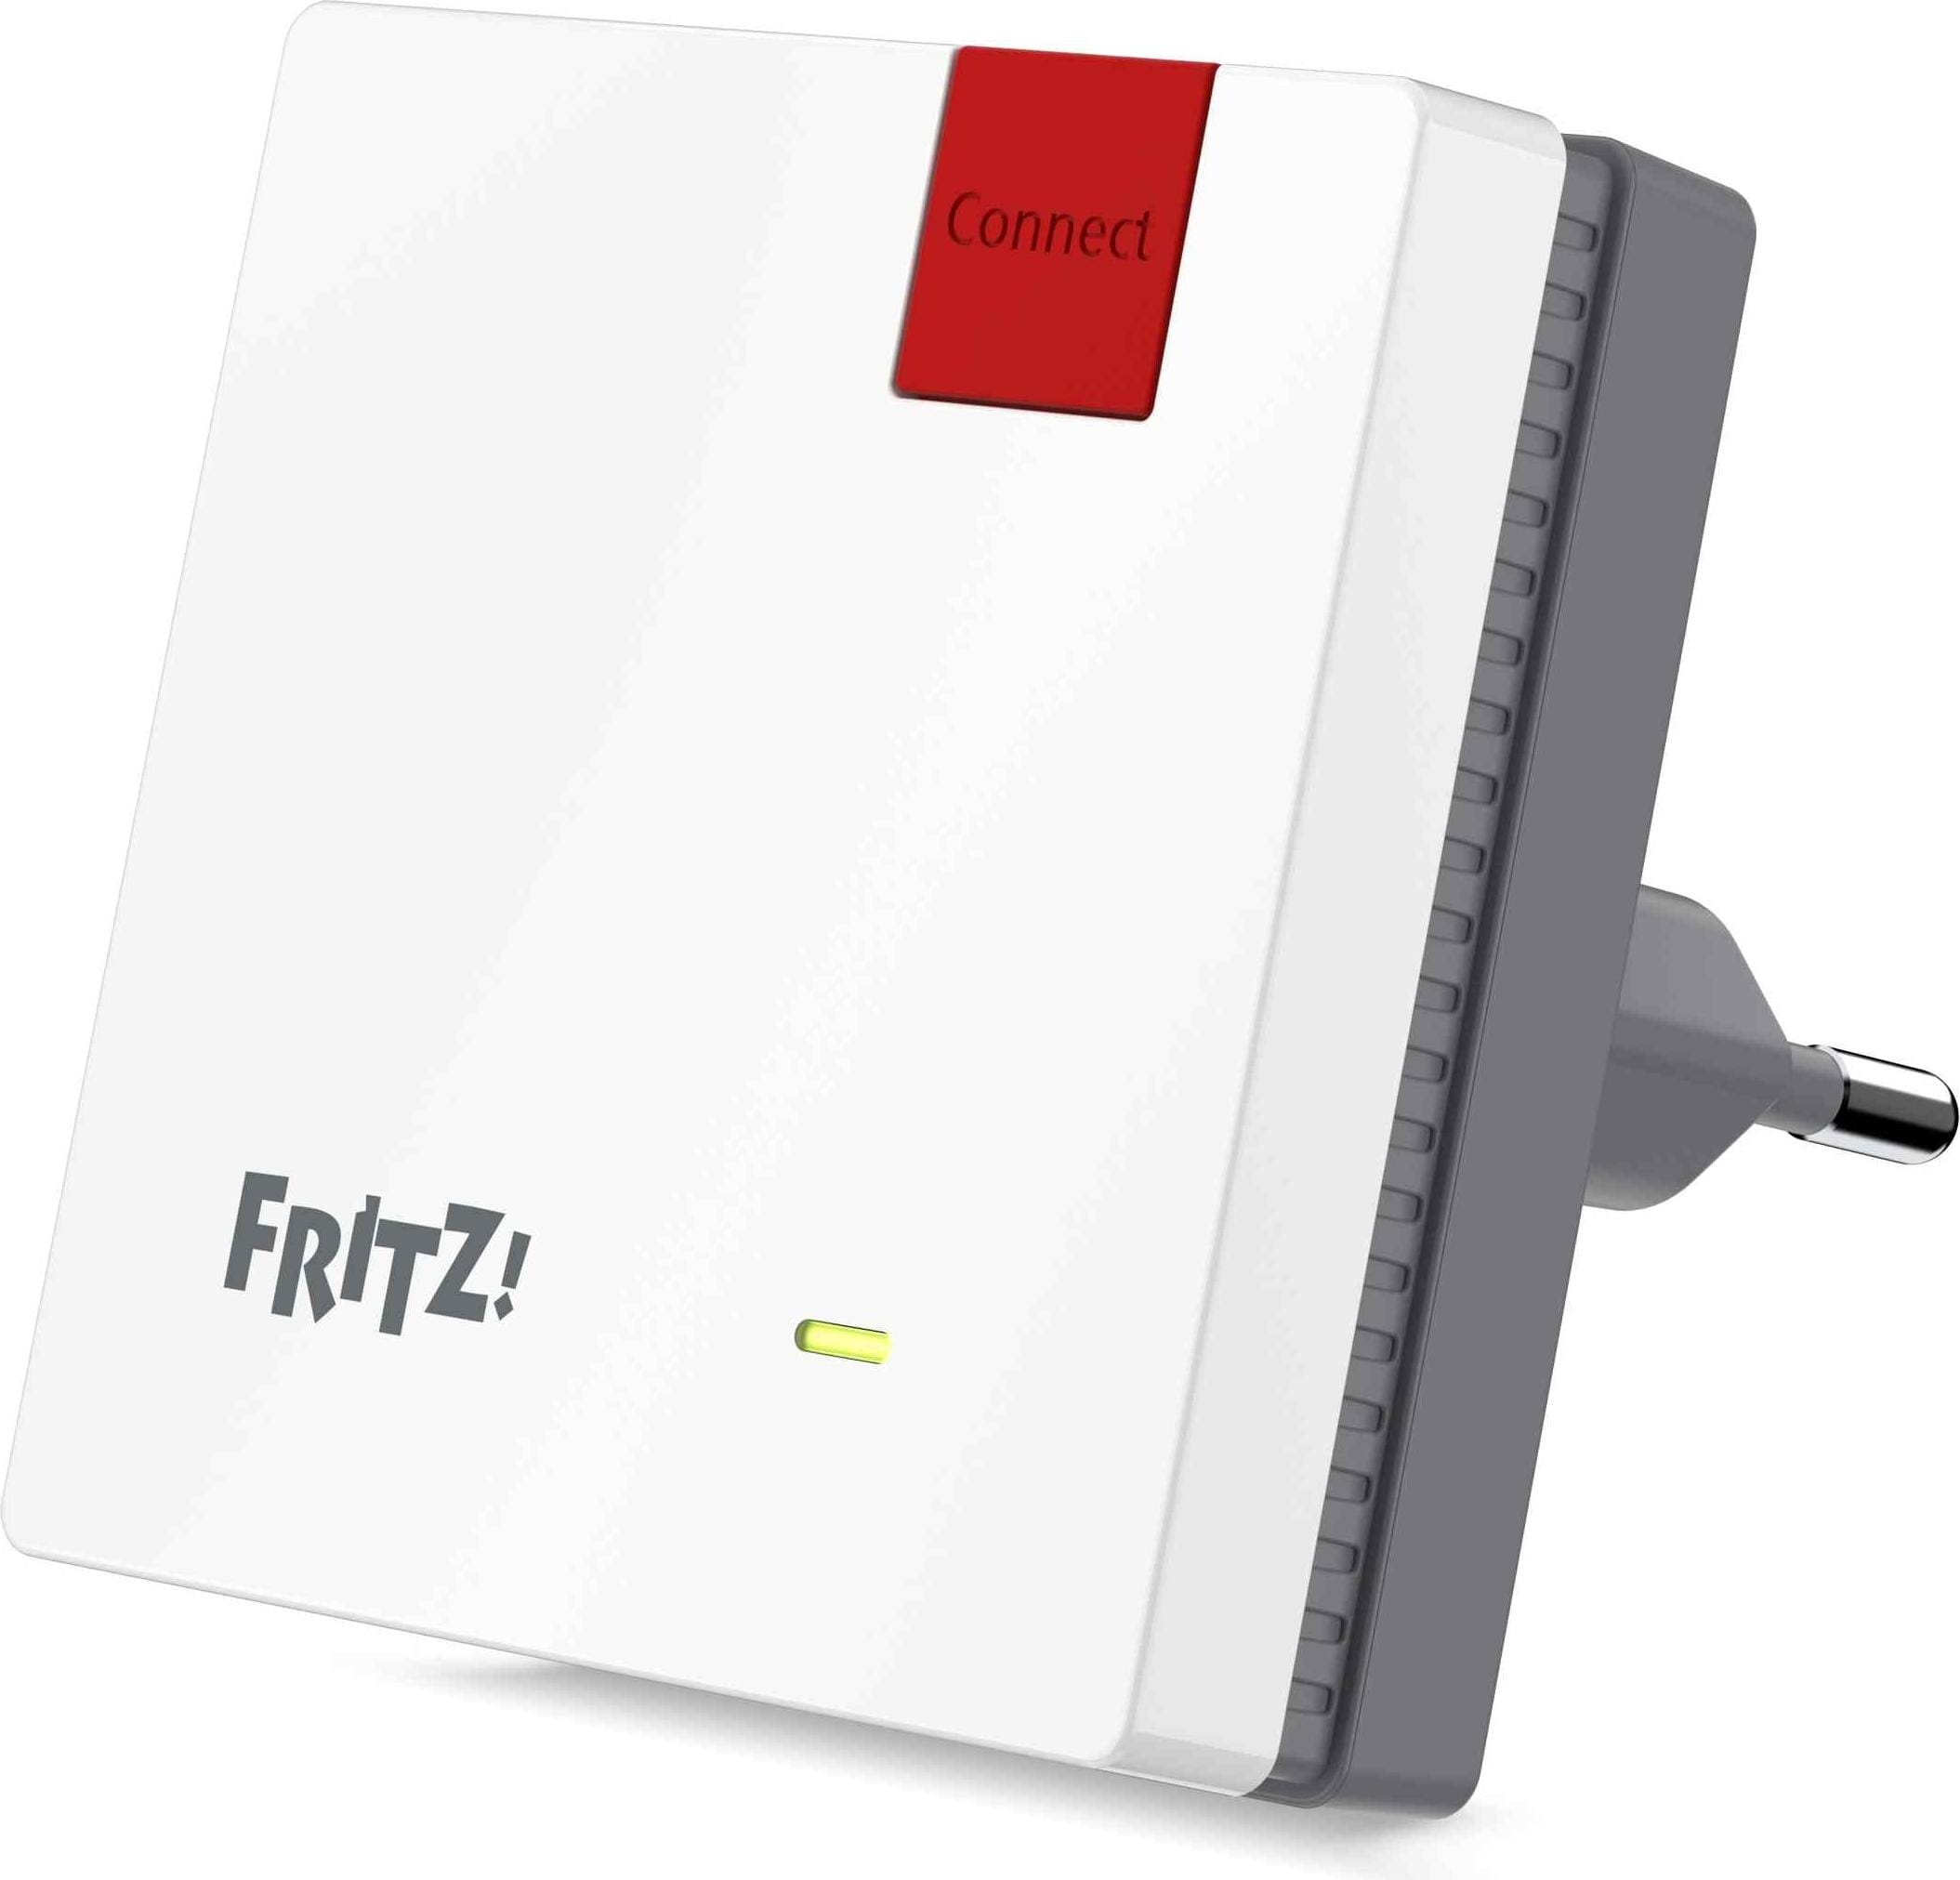 AVM FRITZ!Repeater 600 (600 Mbit/s), WLAN Repeater